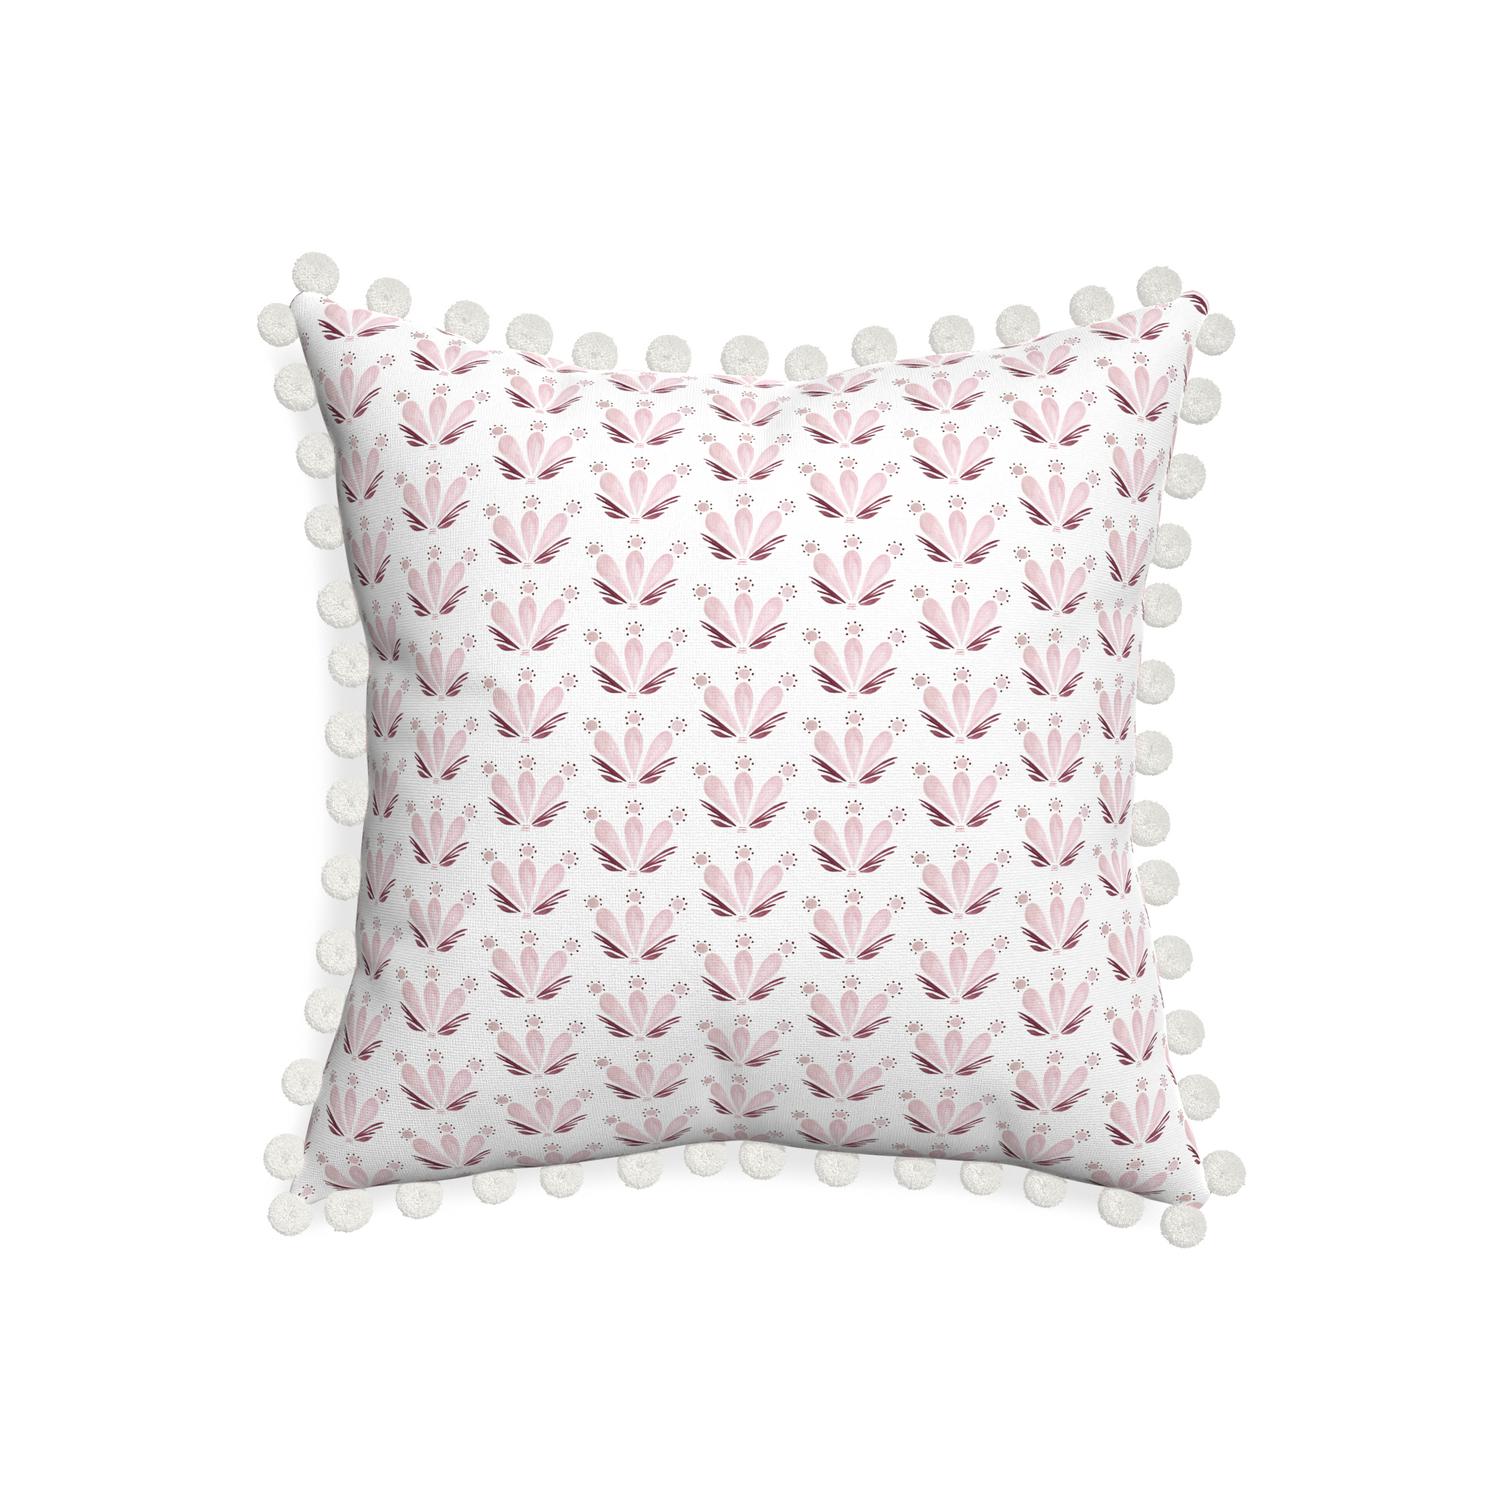 20-square serena pink custom pink & burgundy drop repeat floralpillow with snow pom pom on white background